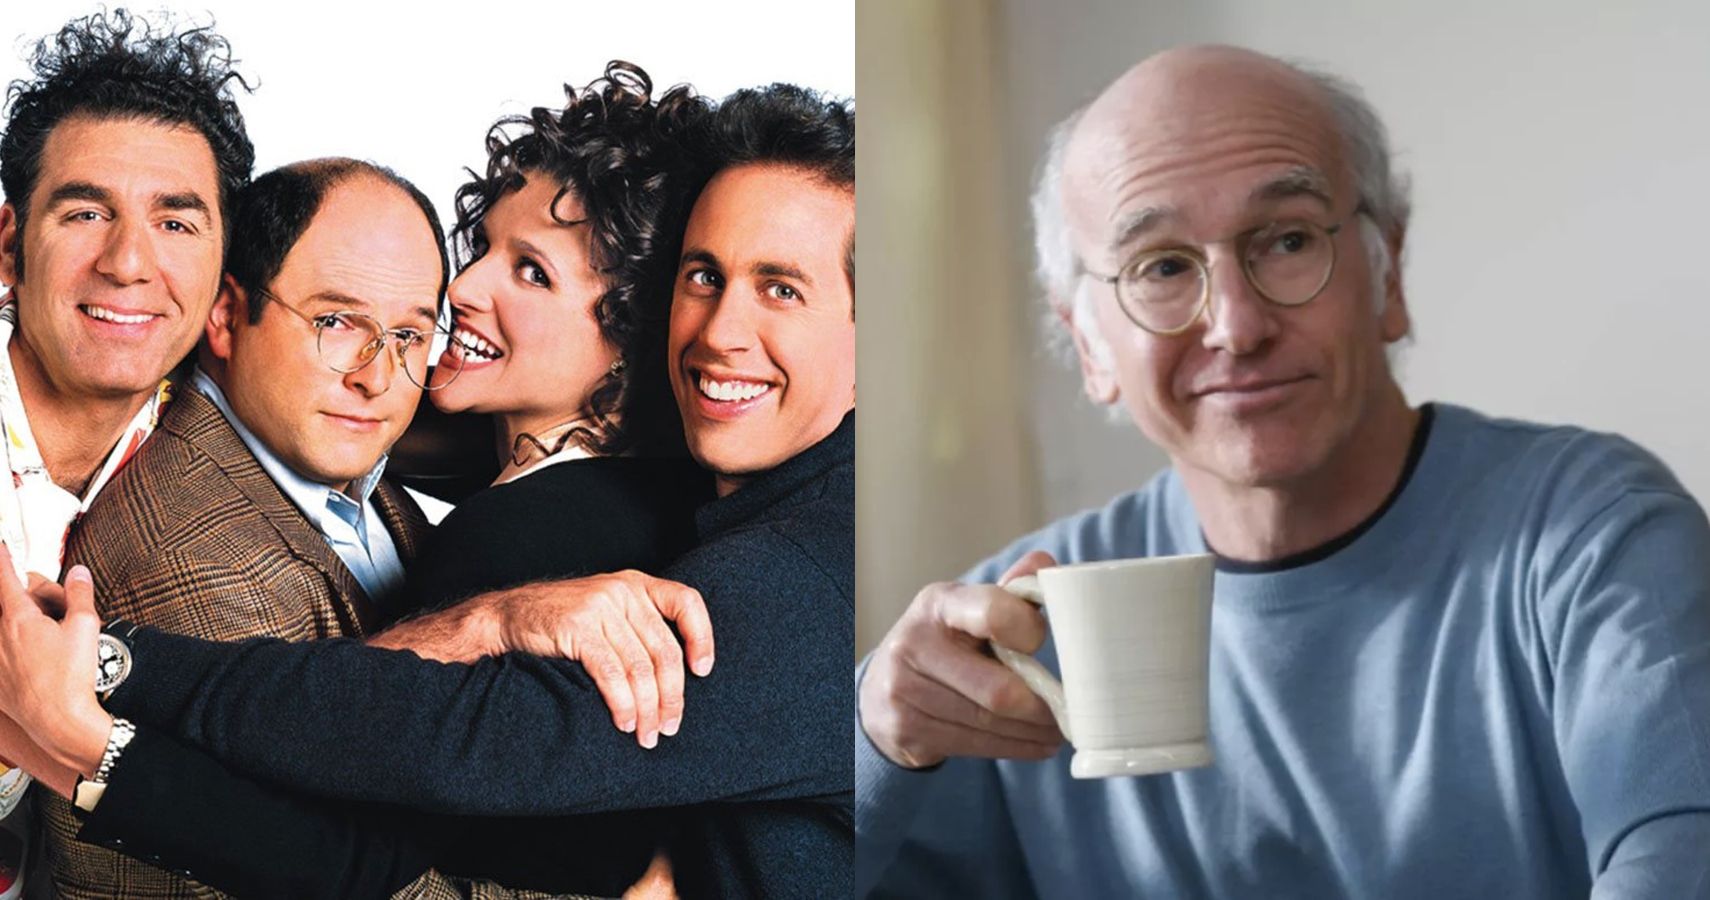 5 Things Seinfeld Does Better Than Curb Your Enthusiasm (& Vice Versa)